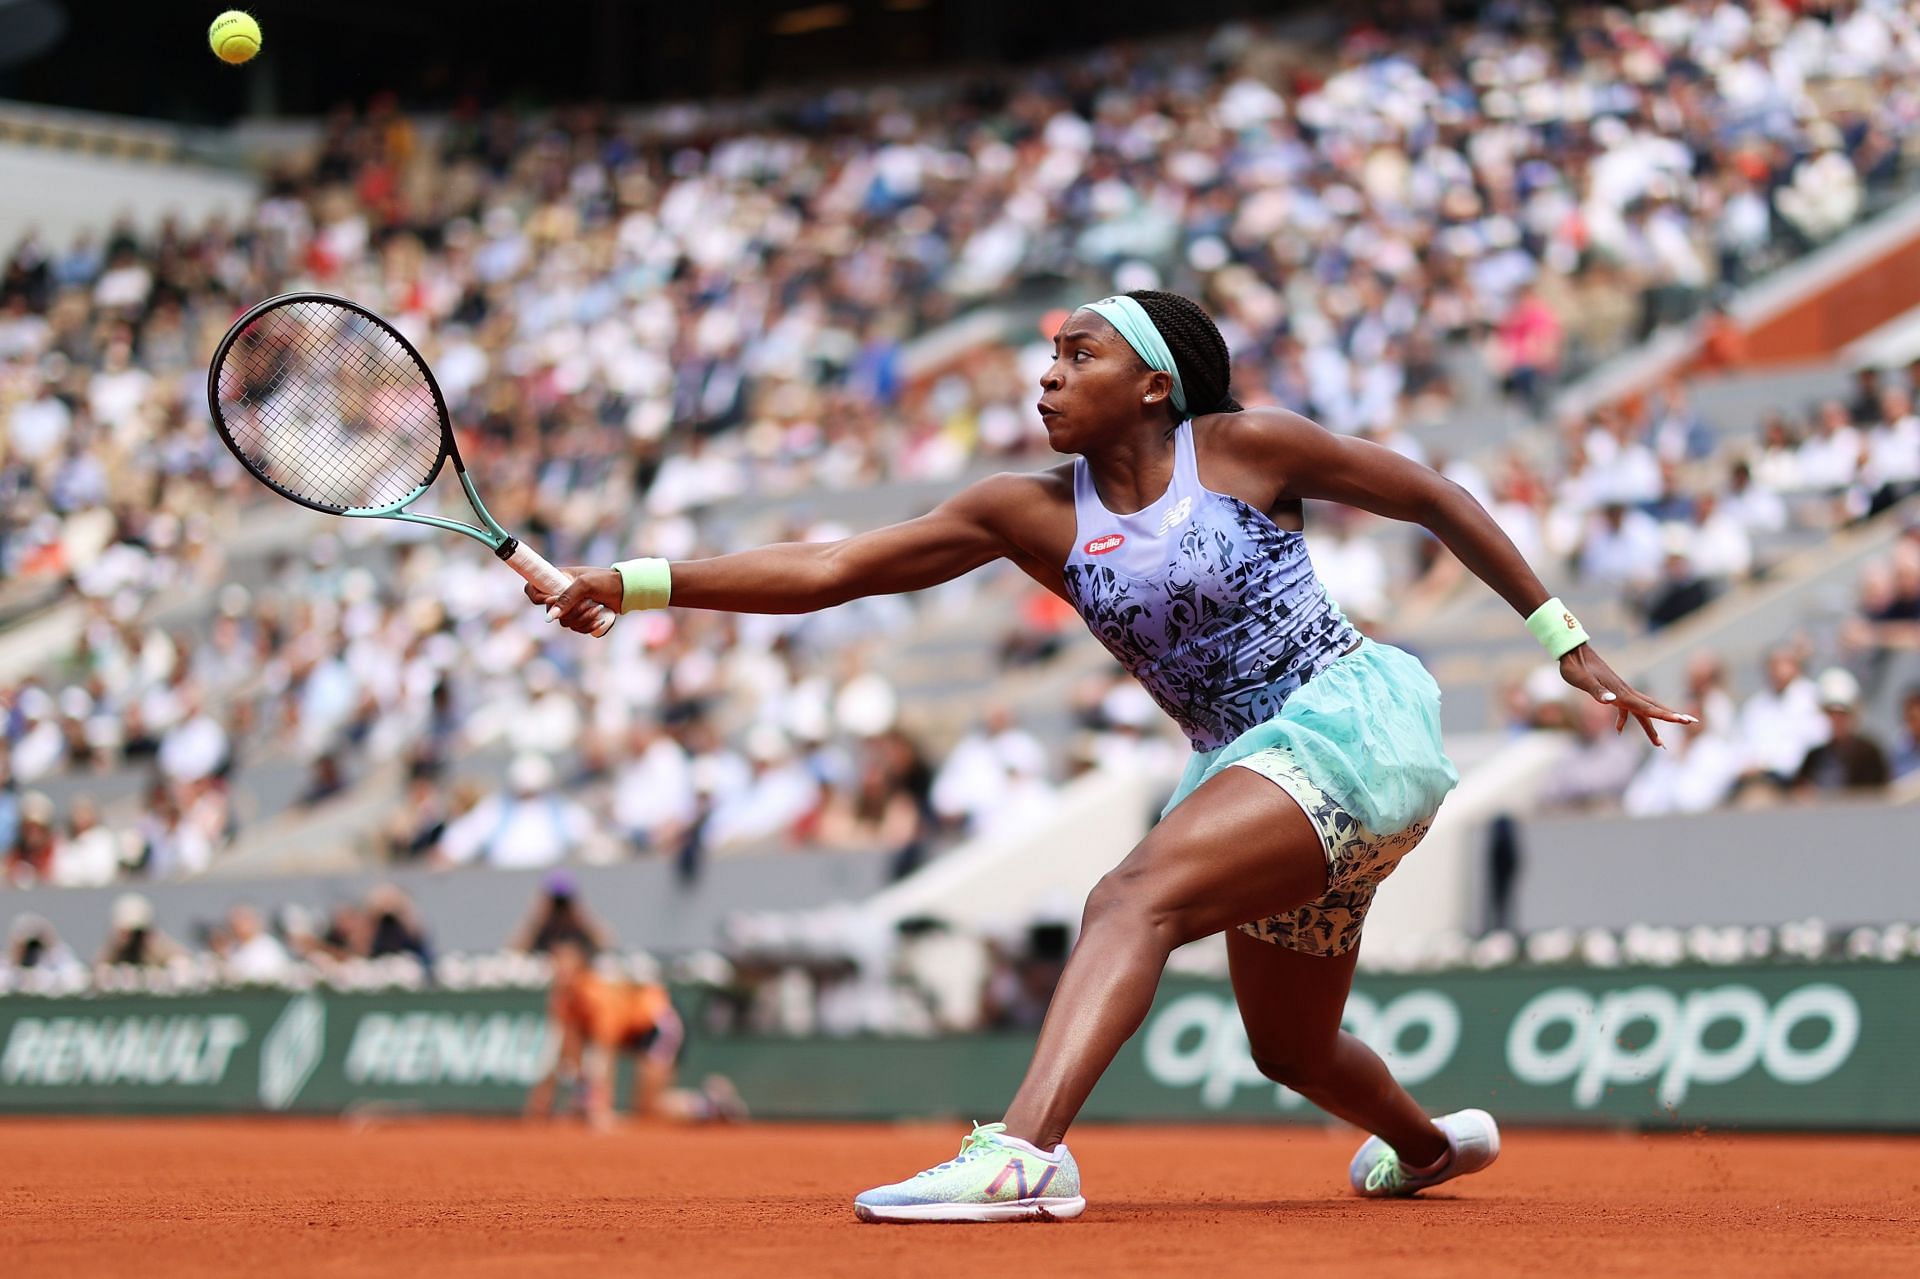 Gauff during her quarterfinal match at the 2022 French Open.